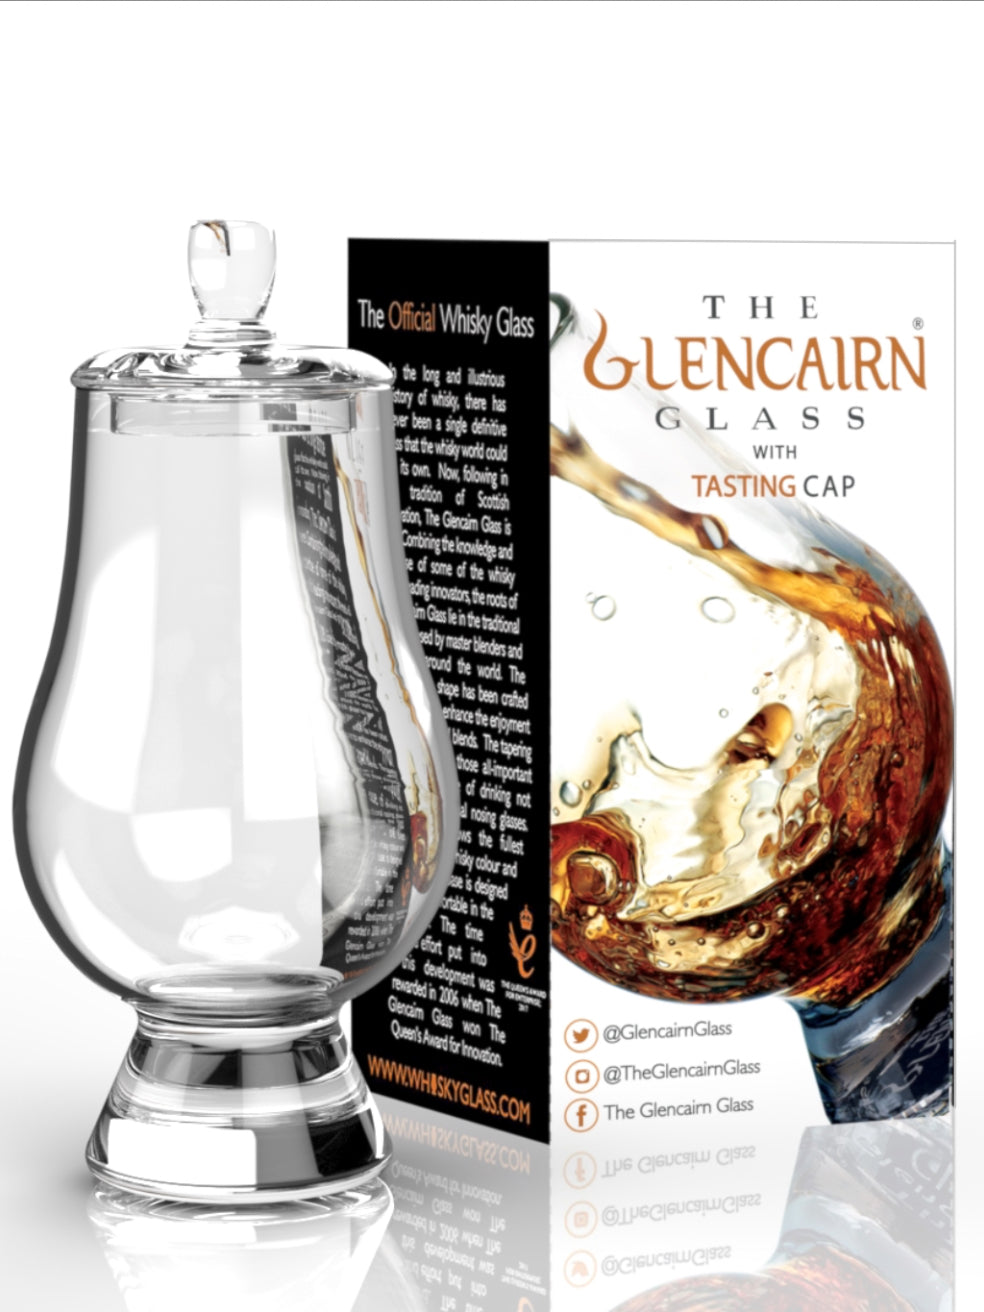 This set includes the Glencairn Whisky Glass and its Tasting Cap together.